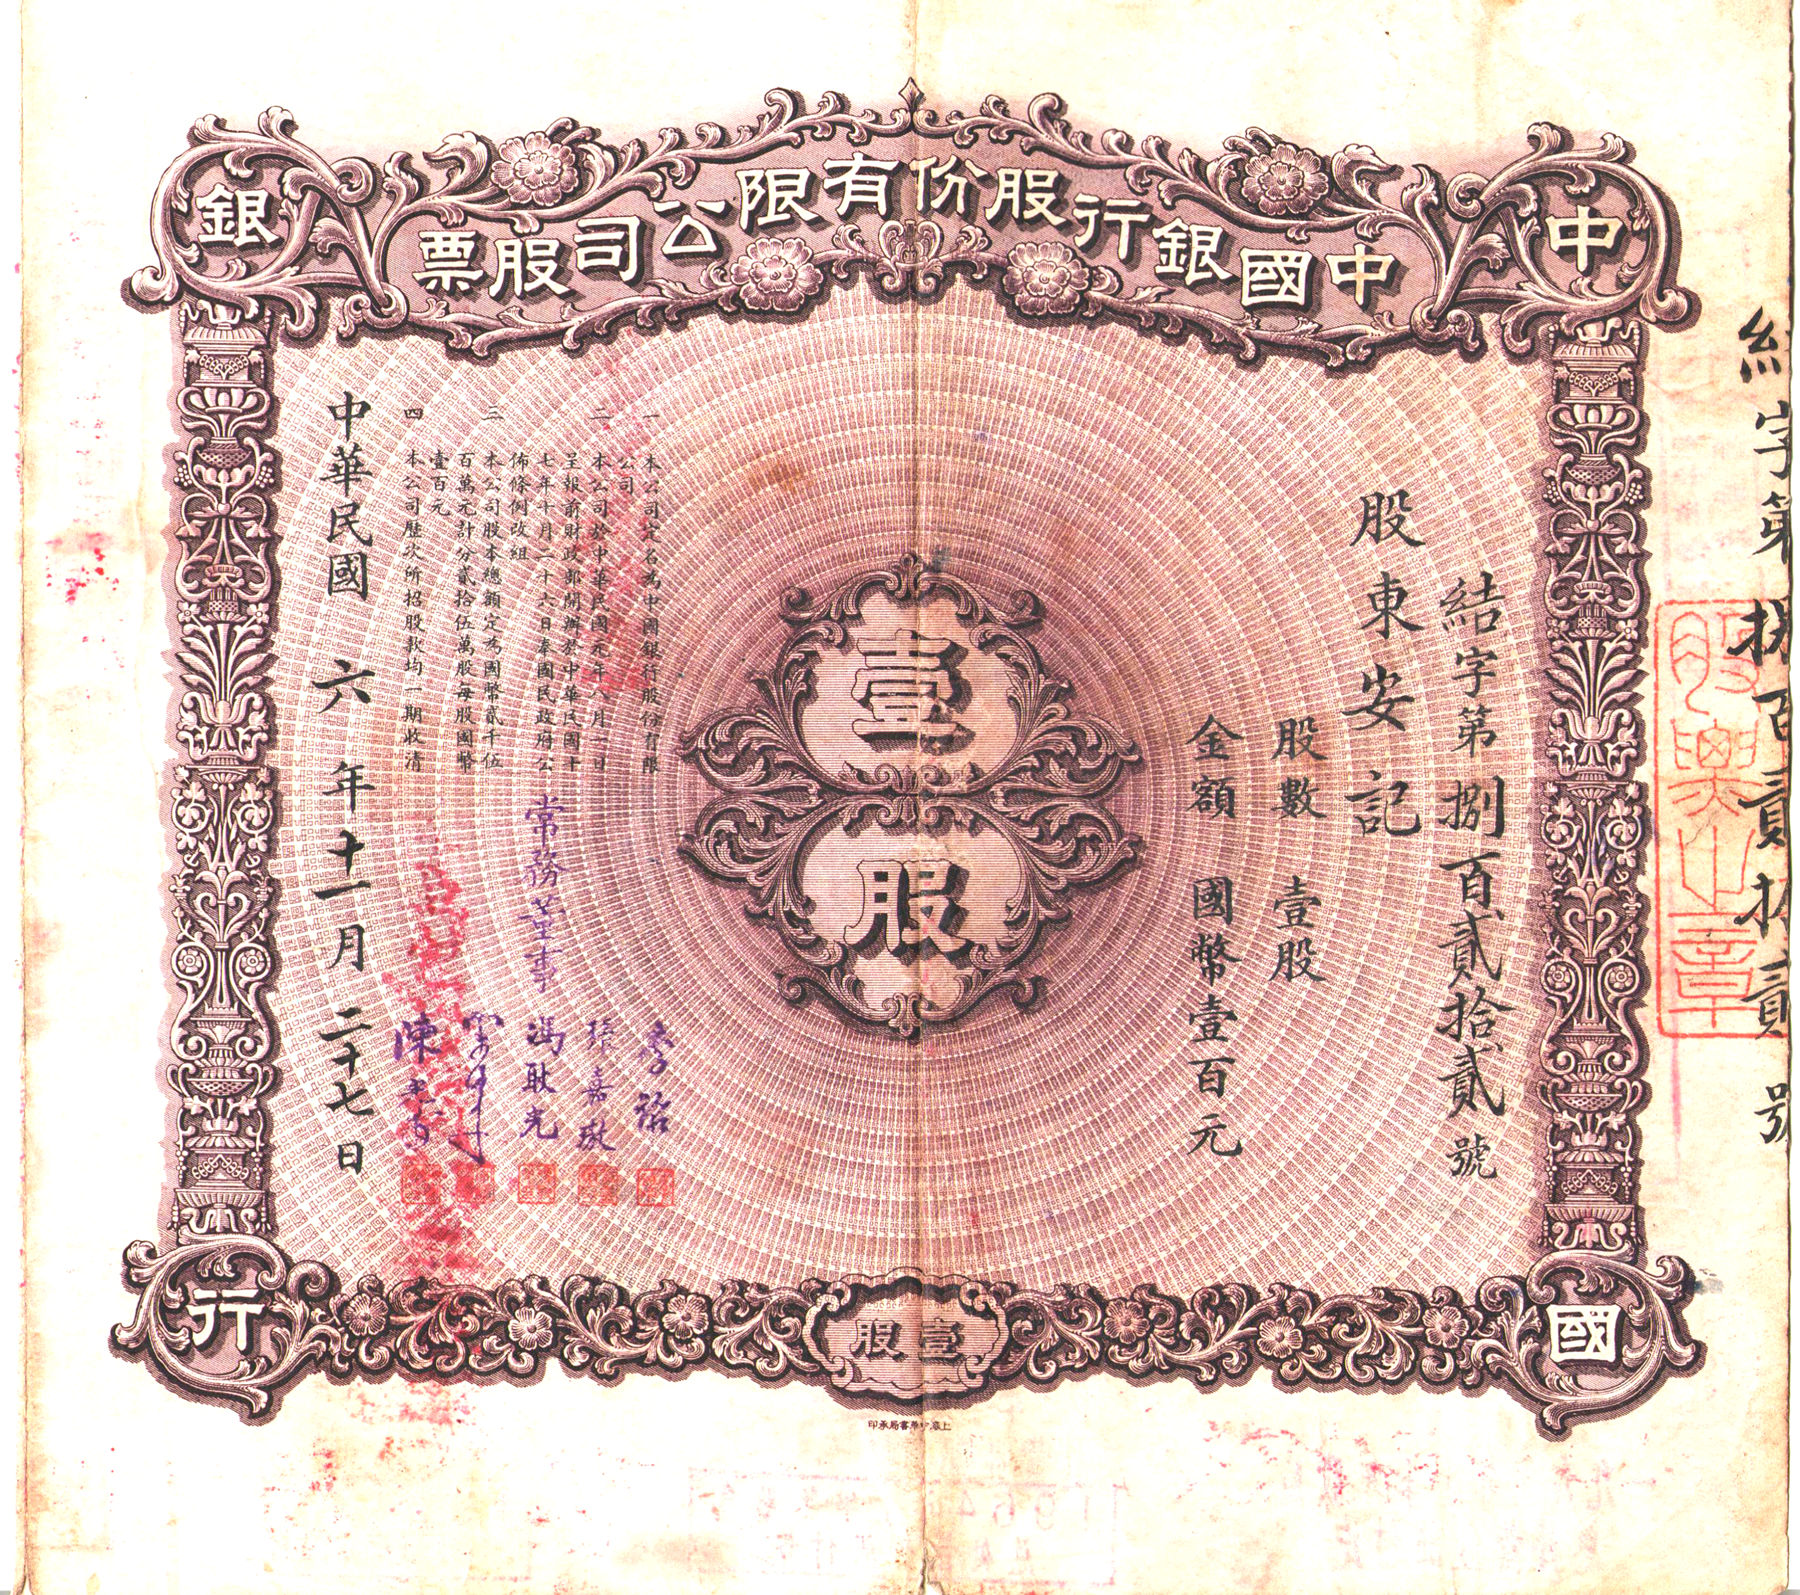 S0332, Bank of China Limited, Stock Certificate 1 Share, China 1922